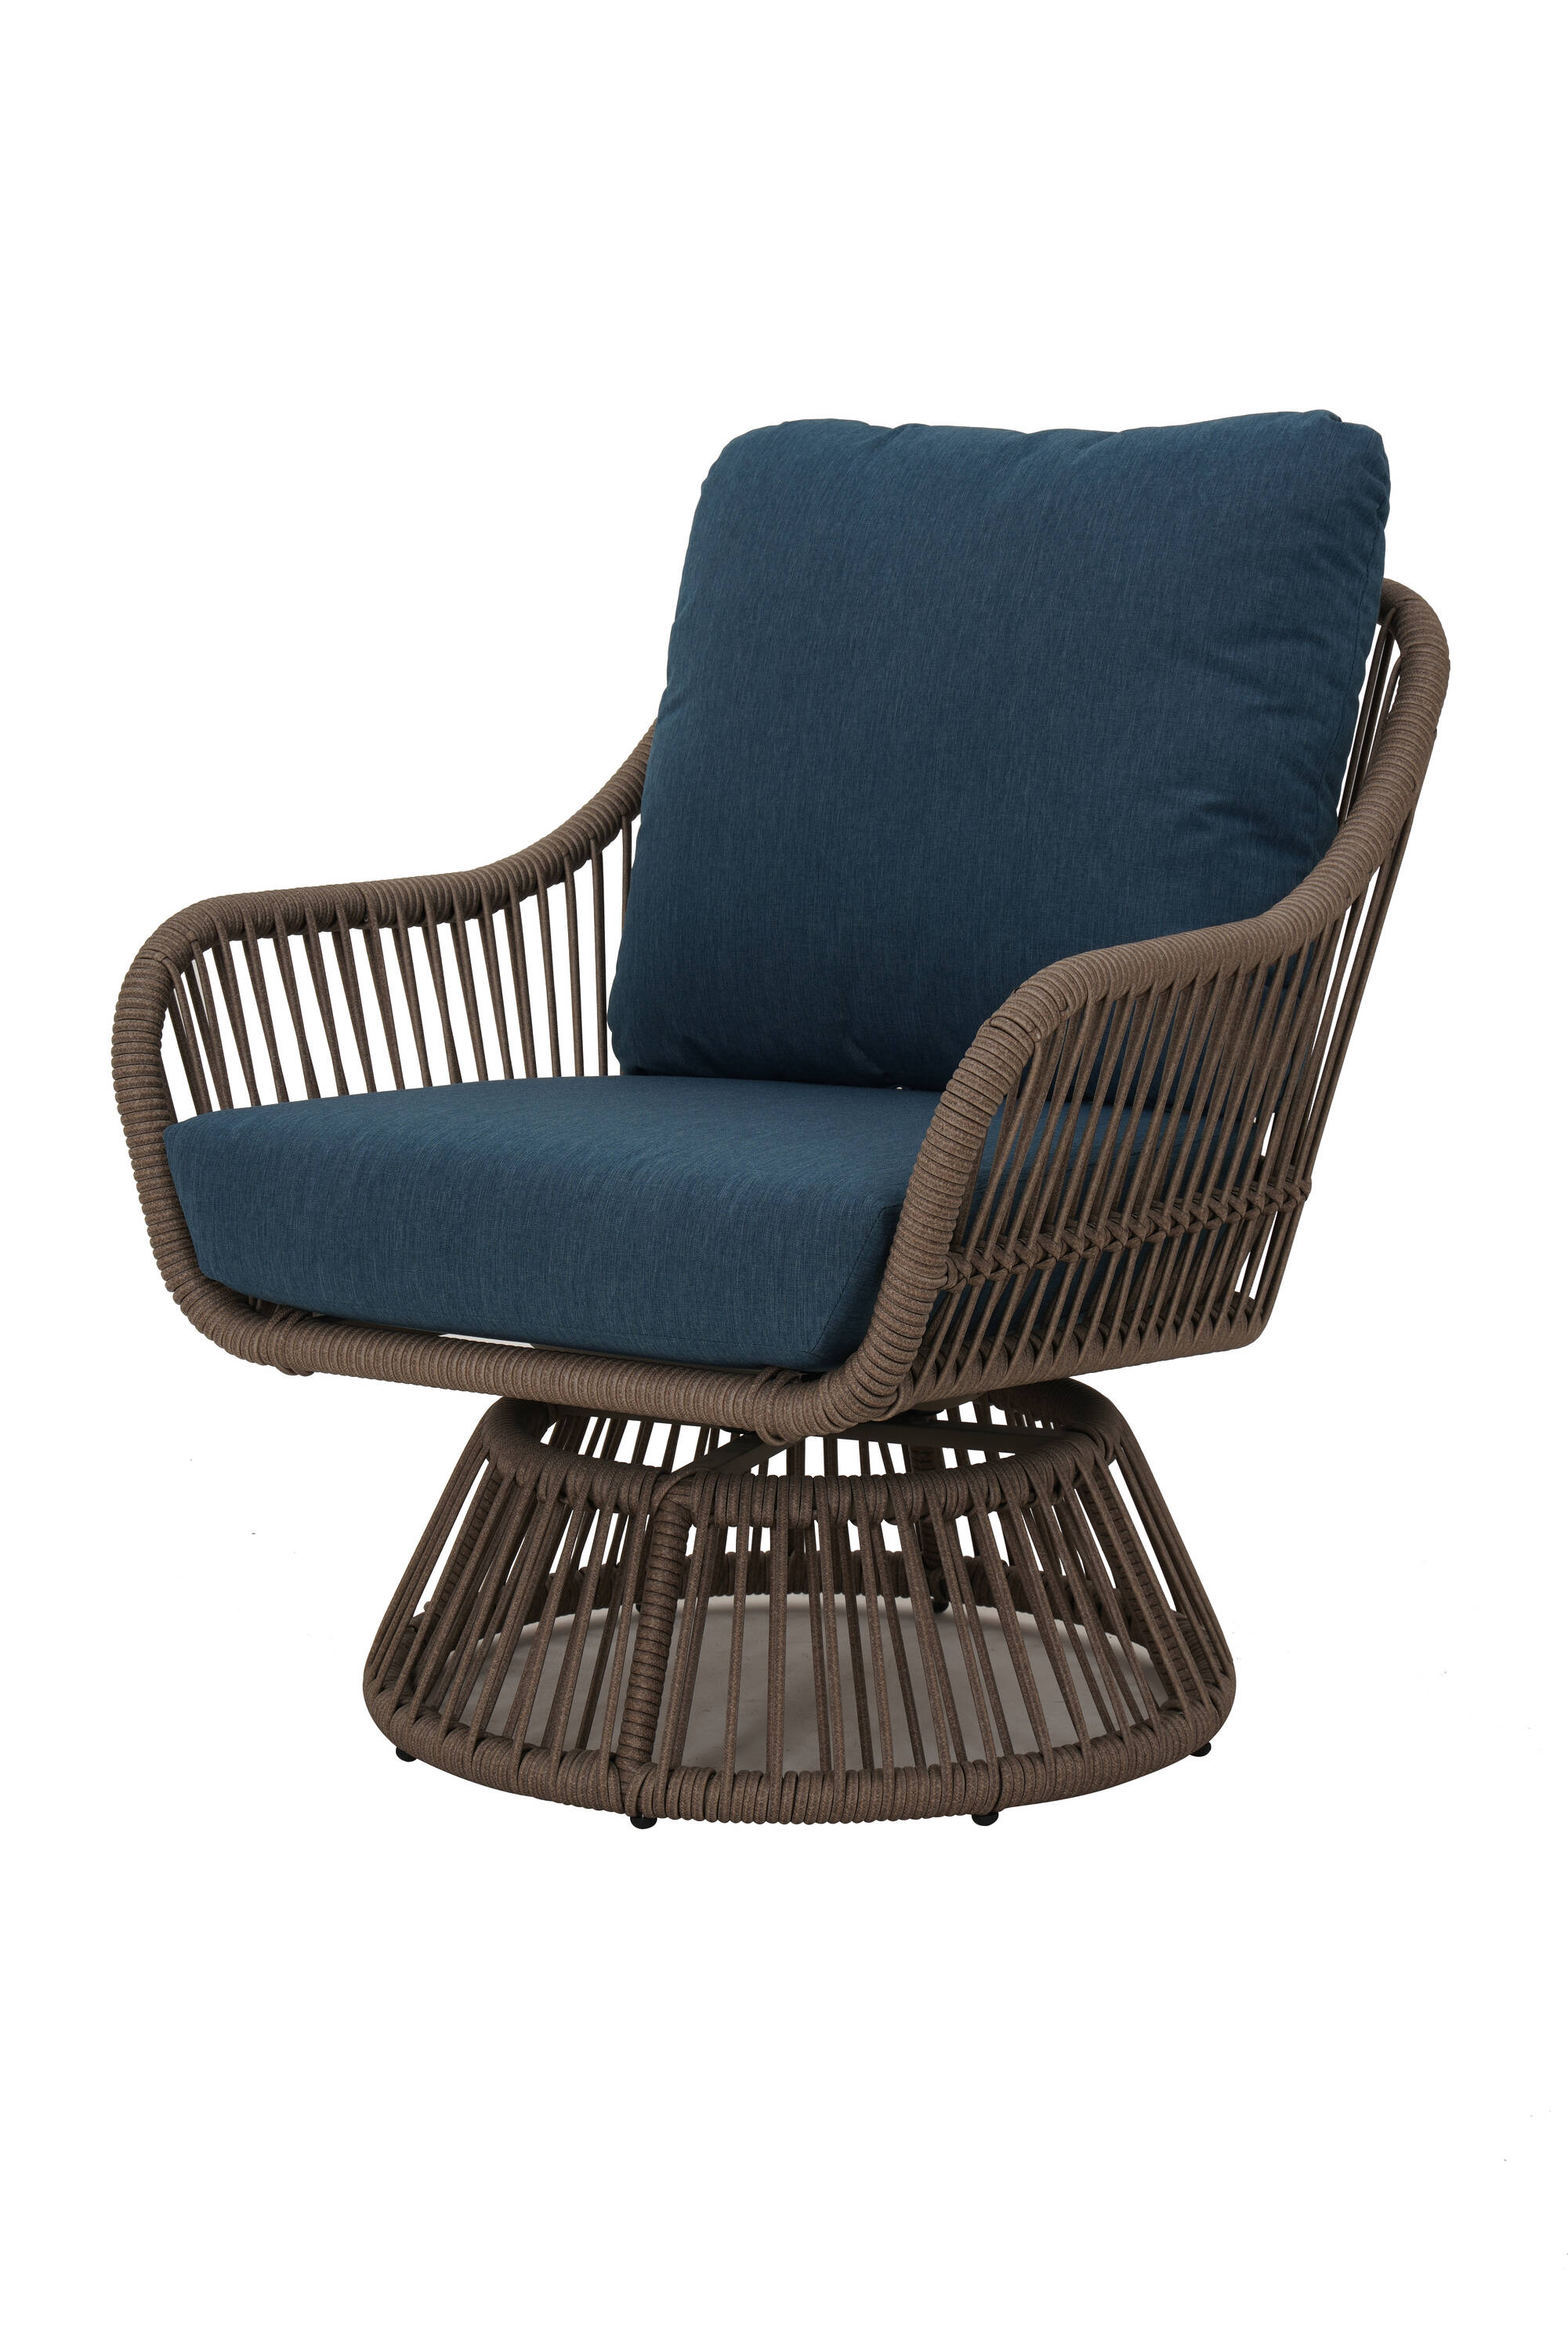 Origin 21 Killian 3-Piece Wicker Patio Conversation Set with Blue Cushions  in the Patio Conversation Sets department at